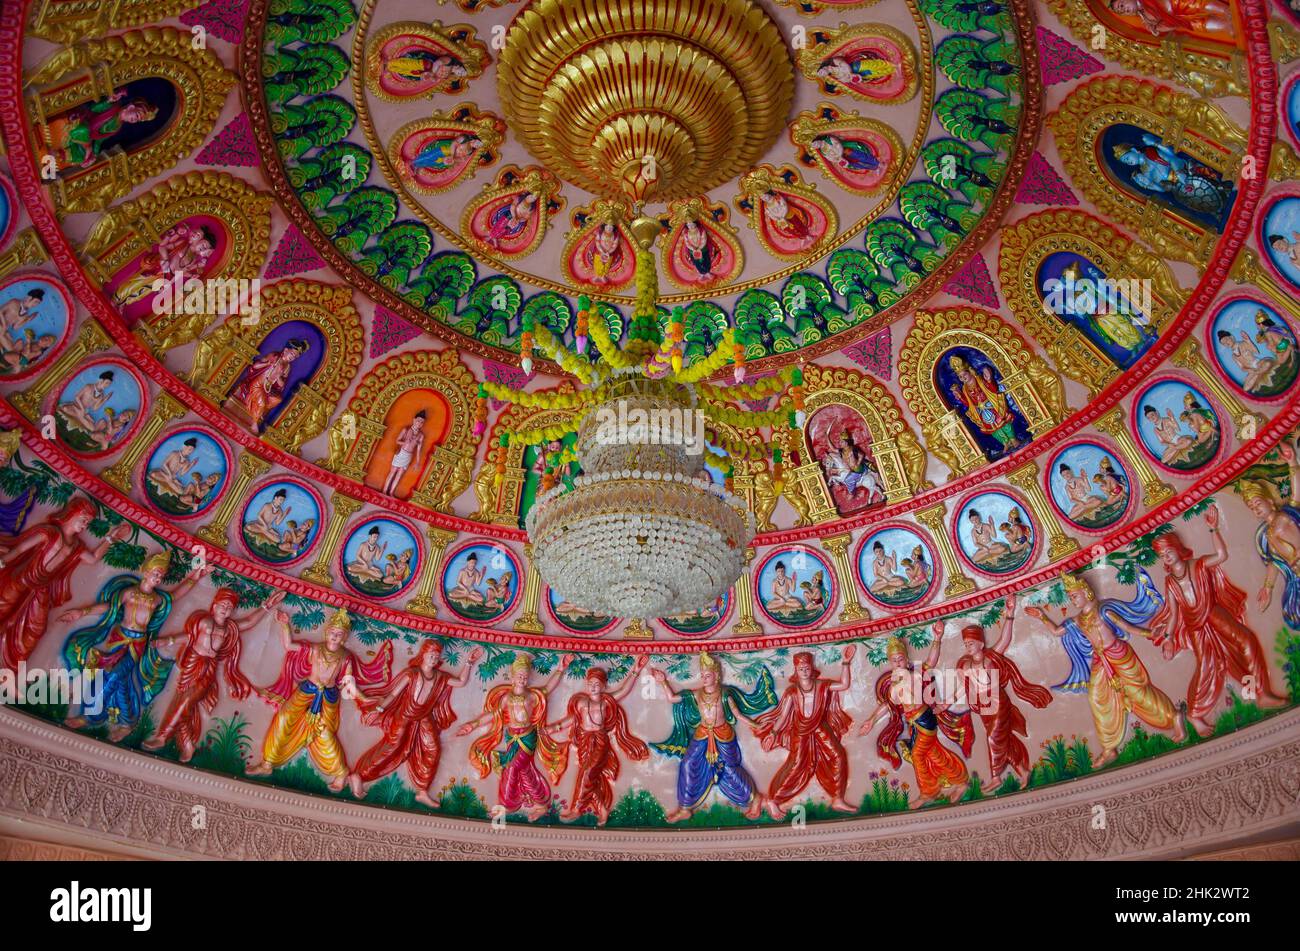 Interior ceiling of Swaminarayan temple with gods, deities and dancing figures carved on the same. Nilkanthdham, Poicha, Gujarat, India Stock Photo